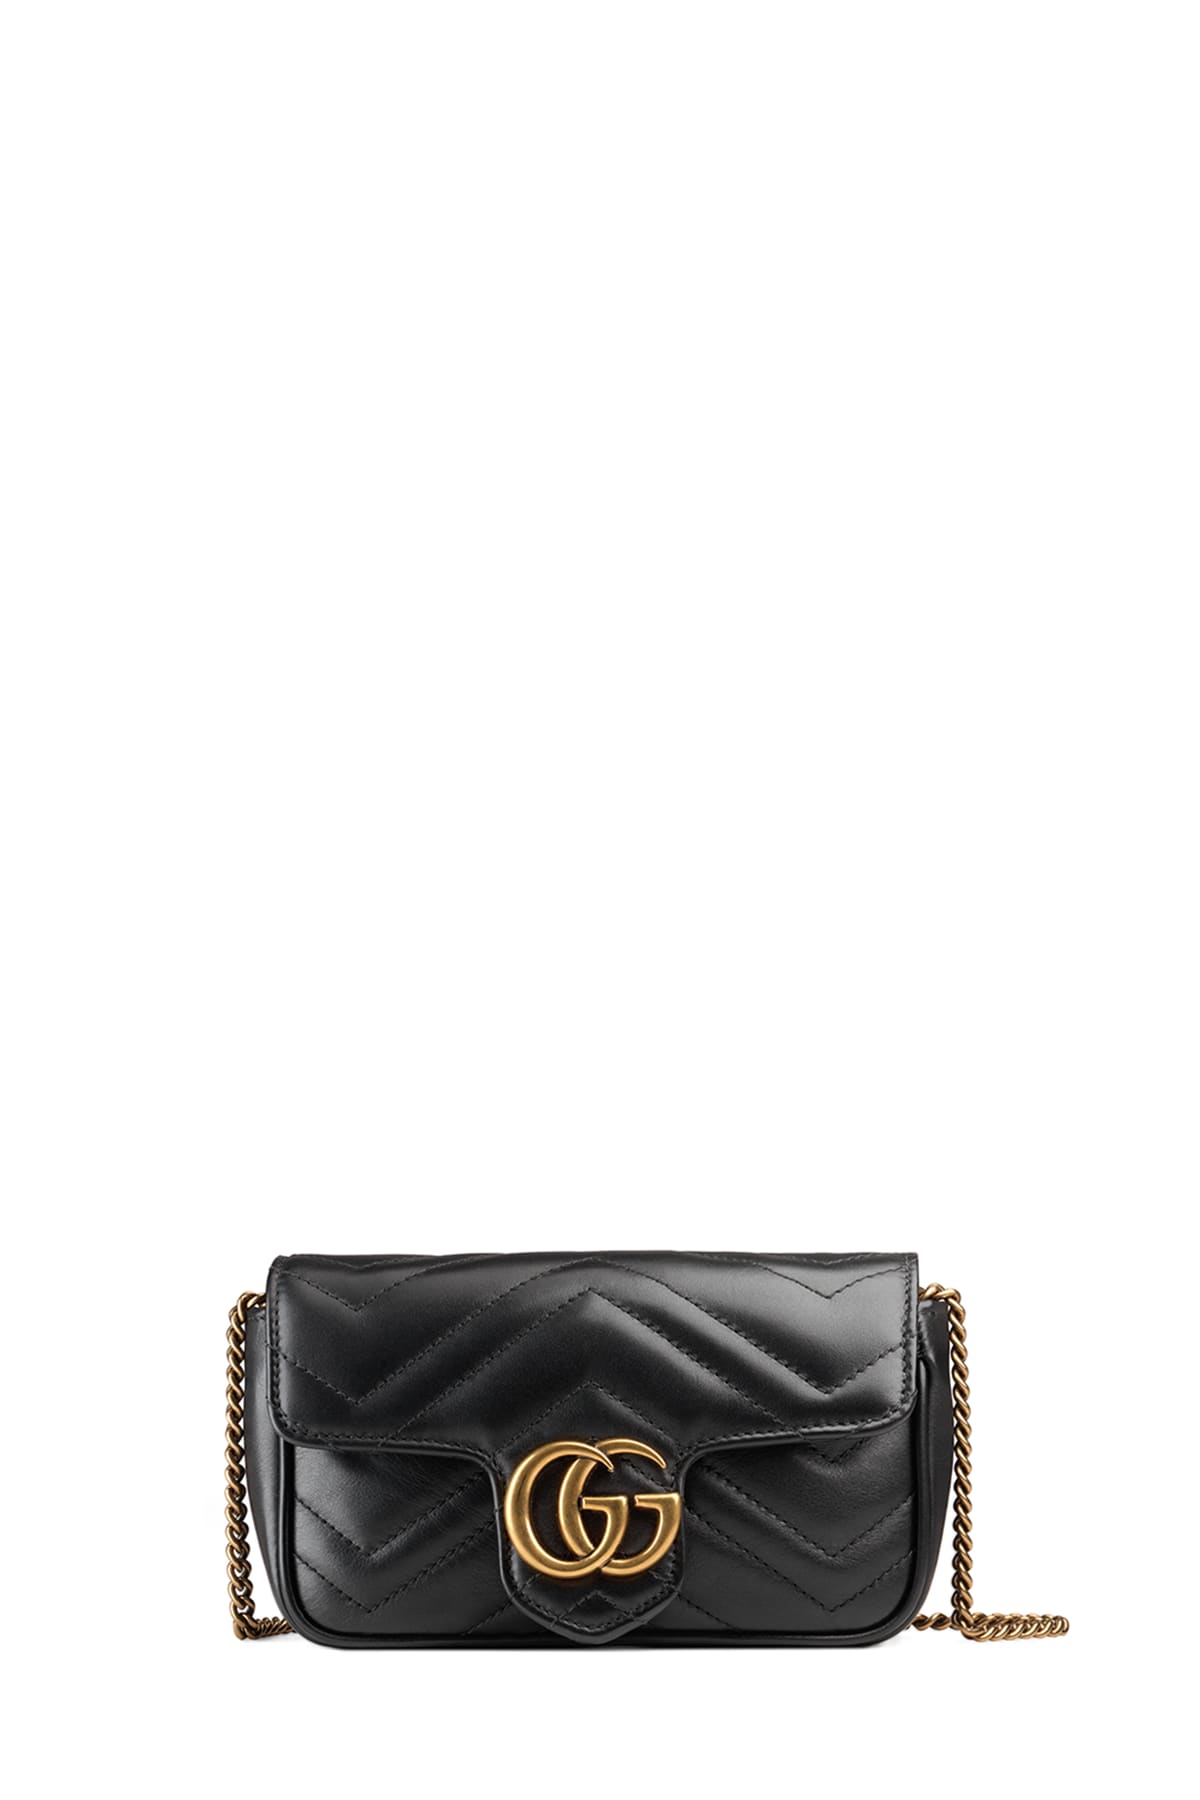 GUCCI GG Marmont super mini quilted leather shoulder bag